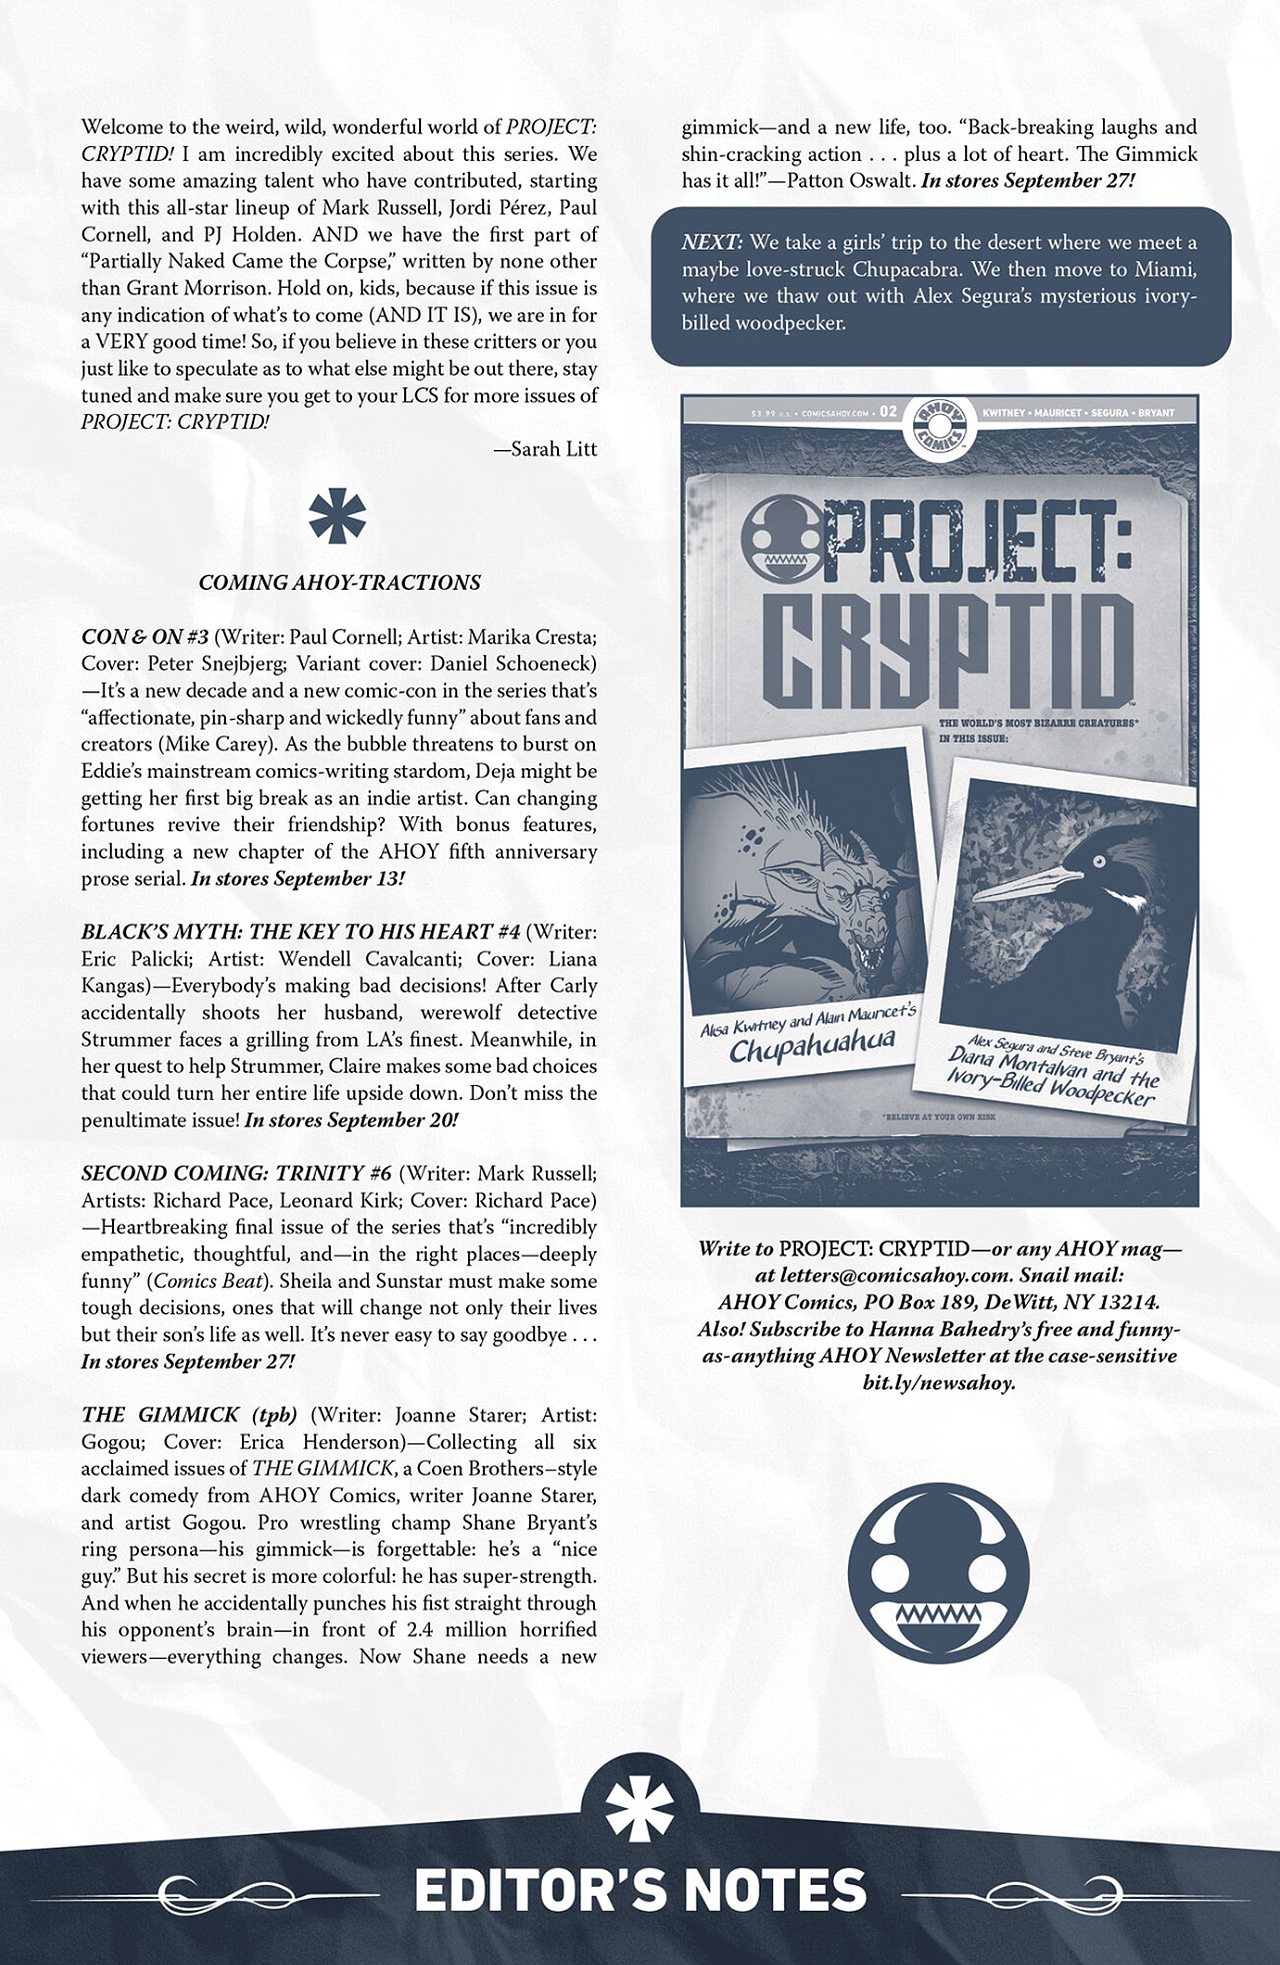 Read online Project Cryptid comic -  Issue #1 - 25